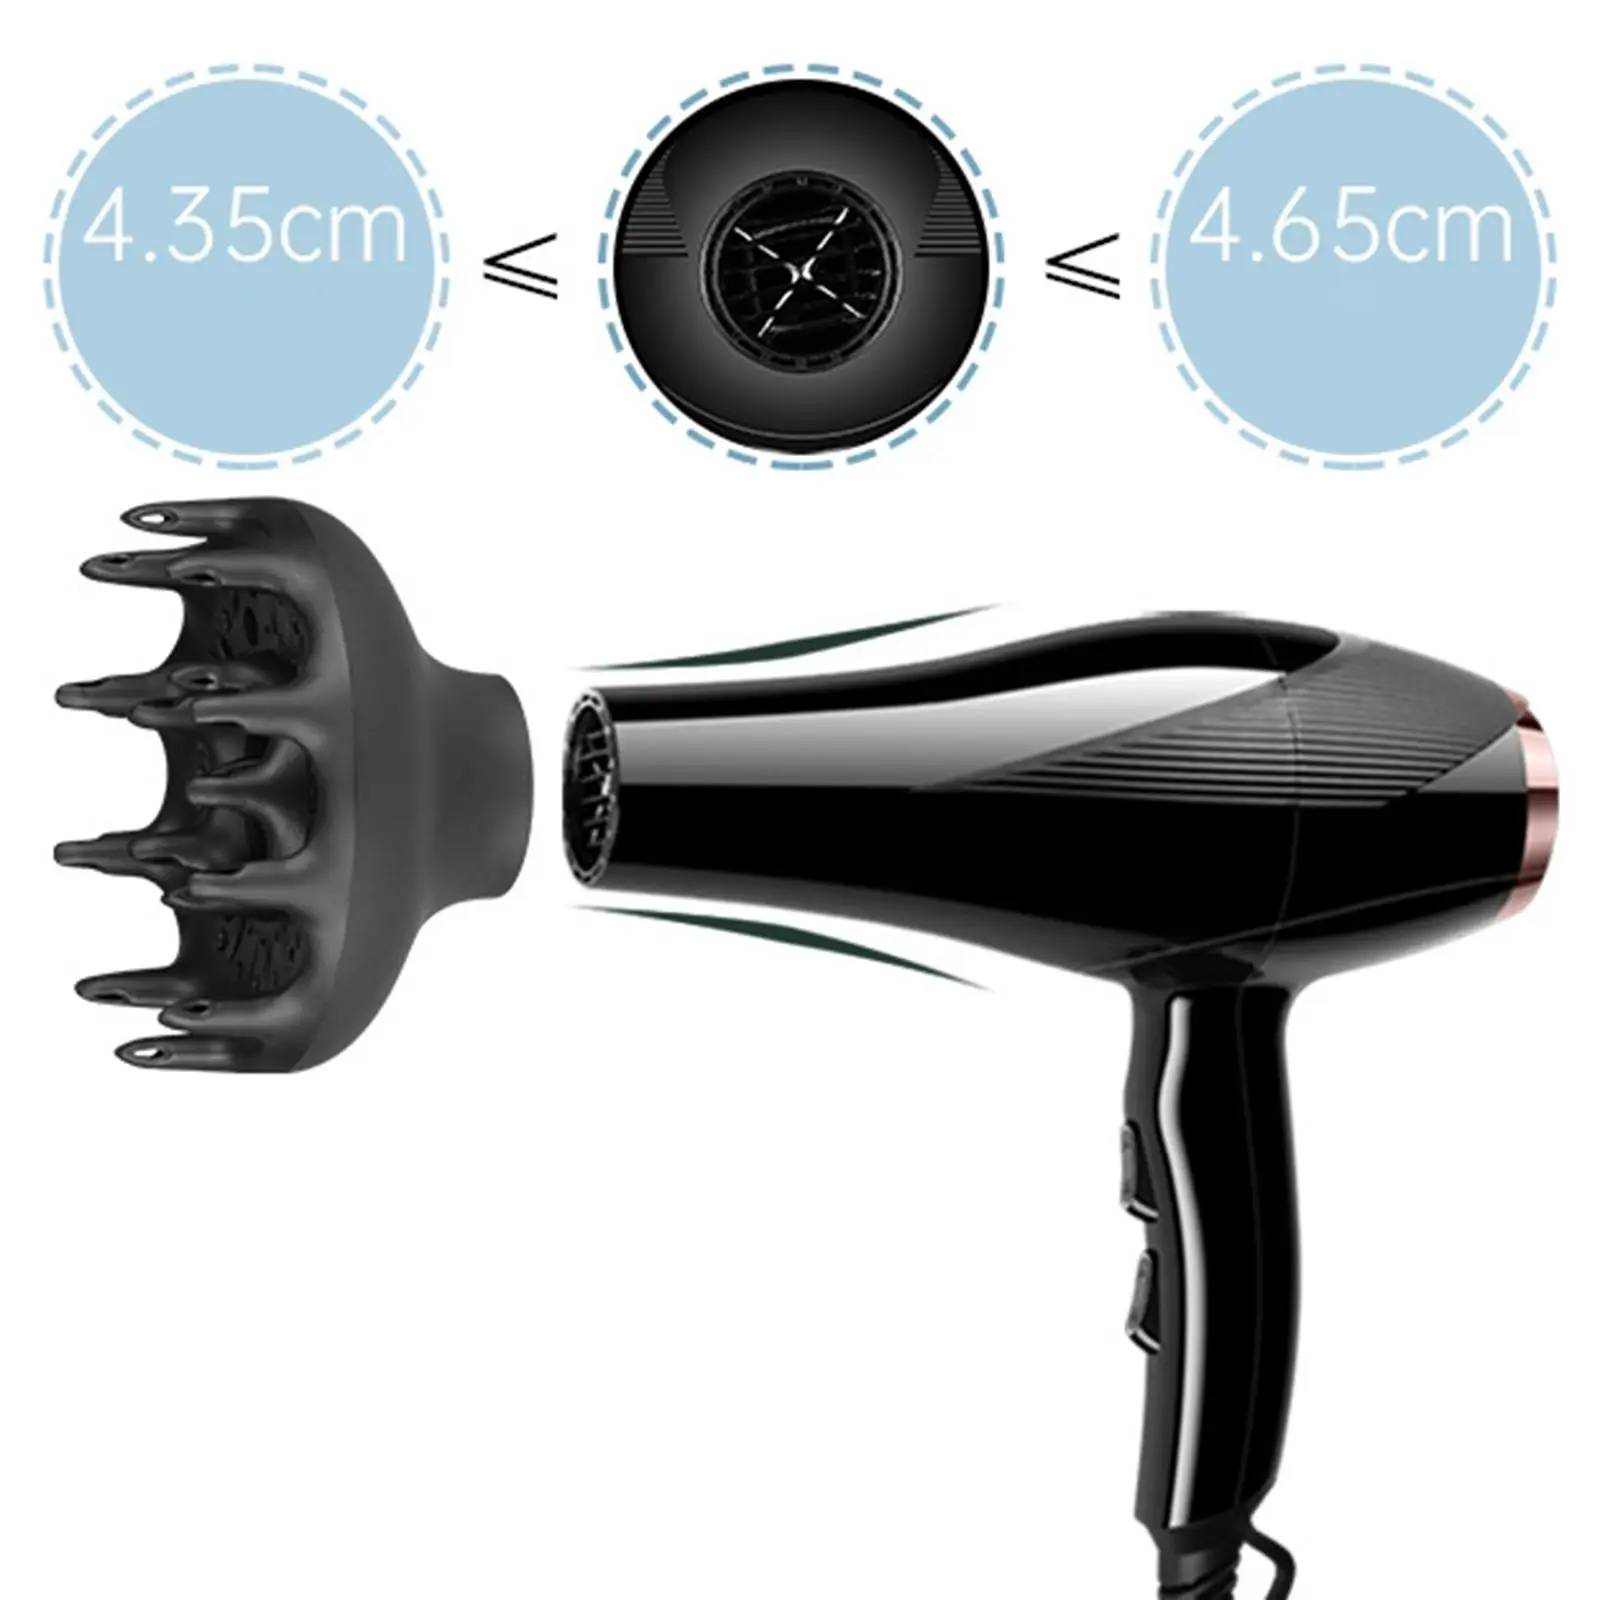 Hair Dryer Diffuser Easy to Attach Suitable for 1.71 inch to 1.83 inch Blow Dryer Universal Hair Diffuser for Curly or Wavy Hair